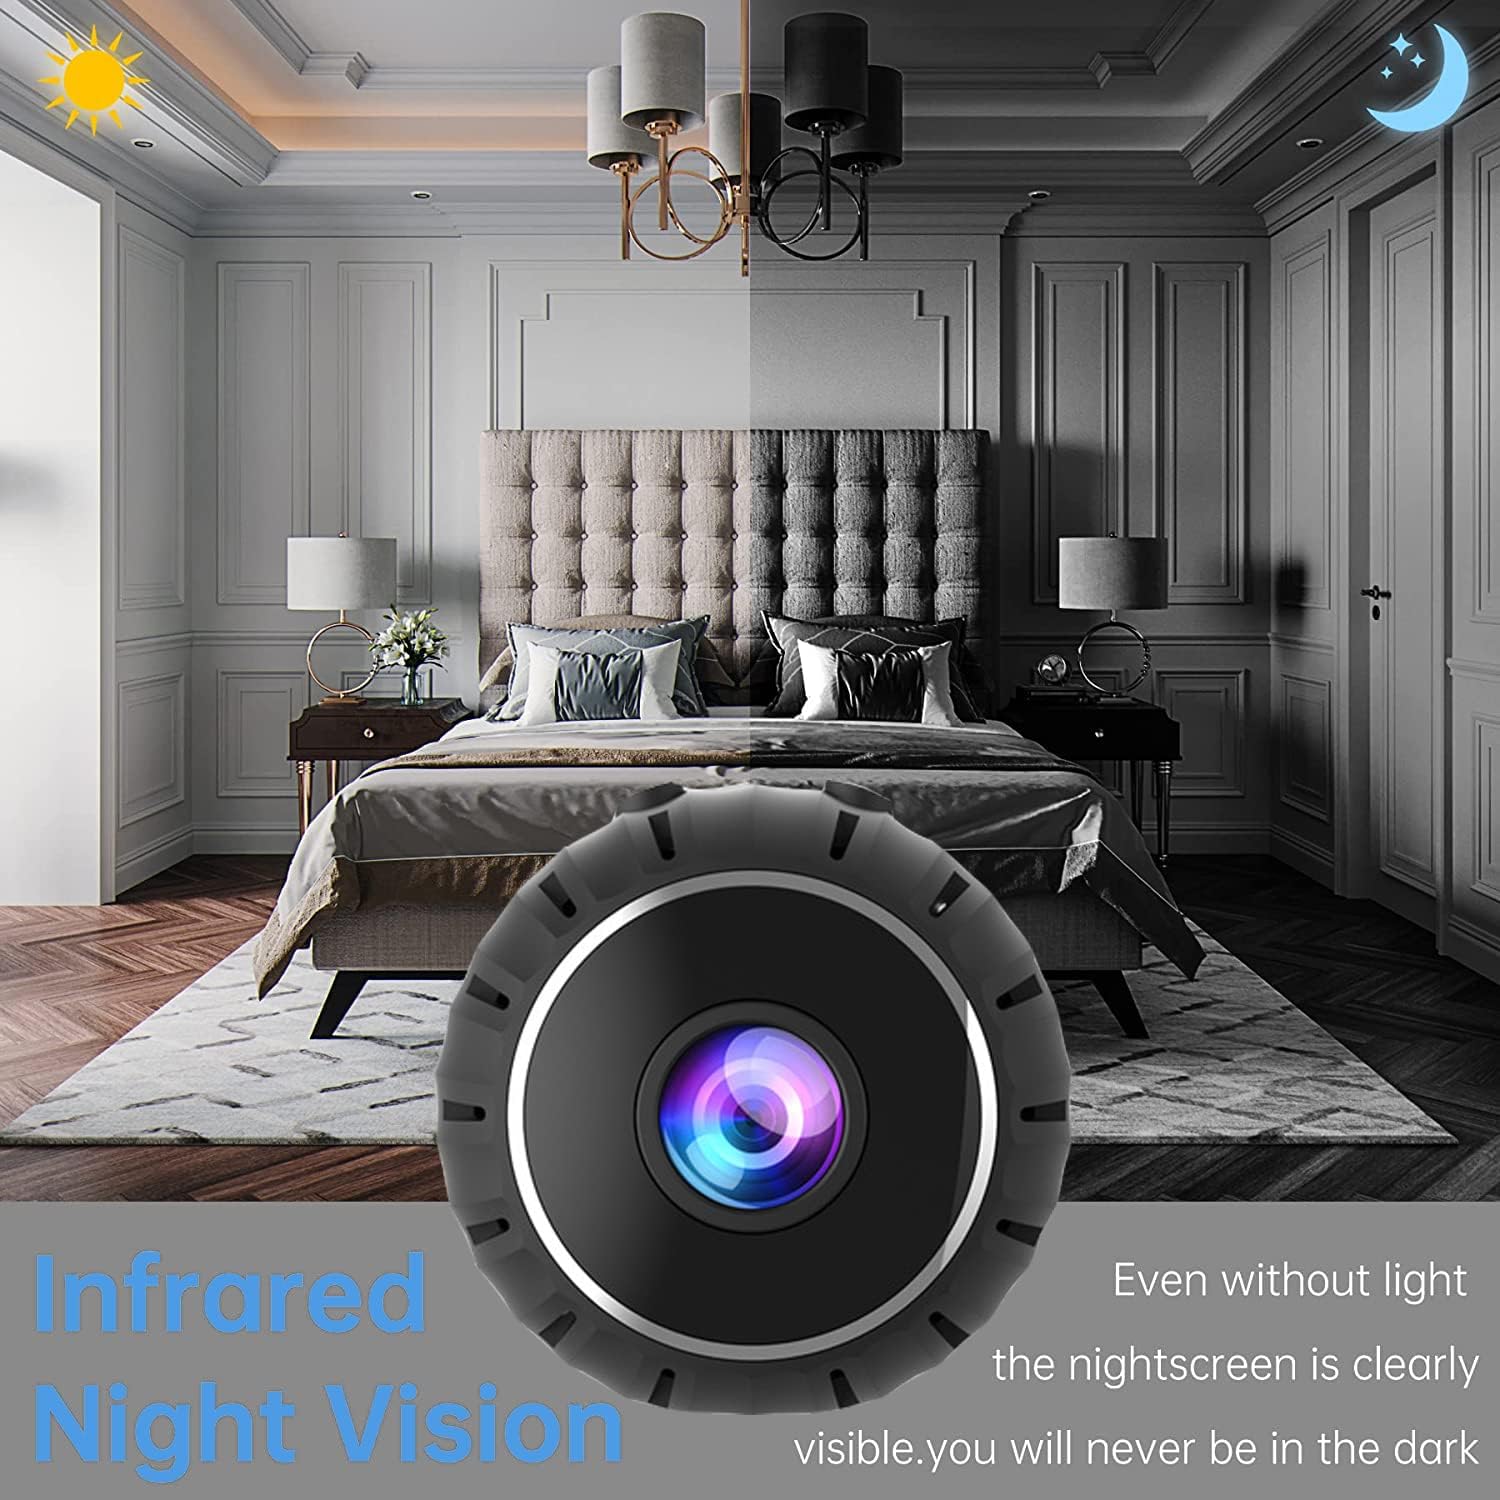 Security-Cameras-Mini-Camera-for-Home-Security-1080p-HD-Mini-IR-Camera-WiFi-Wireless-Small-Indoor-Nanny-Camera-Cell-Phone-APP-Control-with-A-Wide-Angle-Remote-View-21